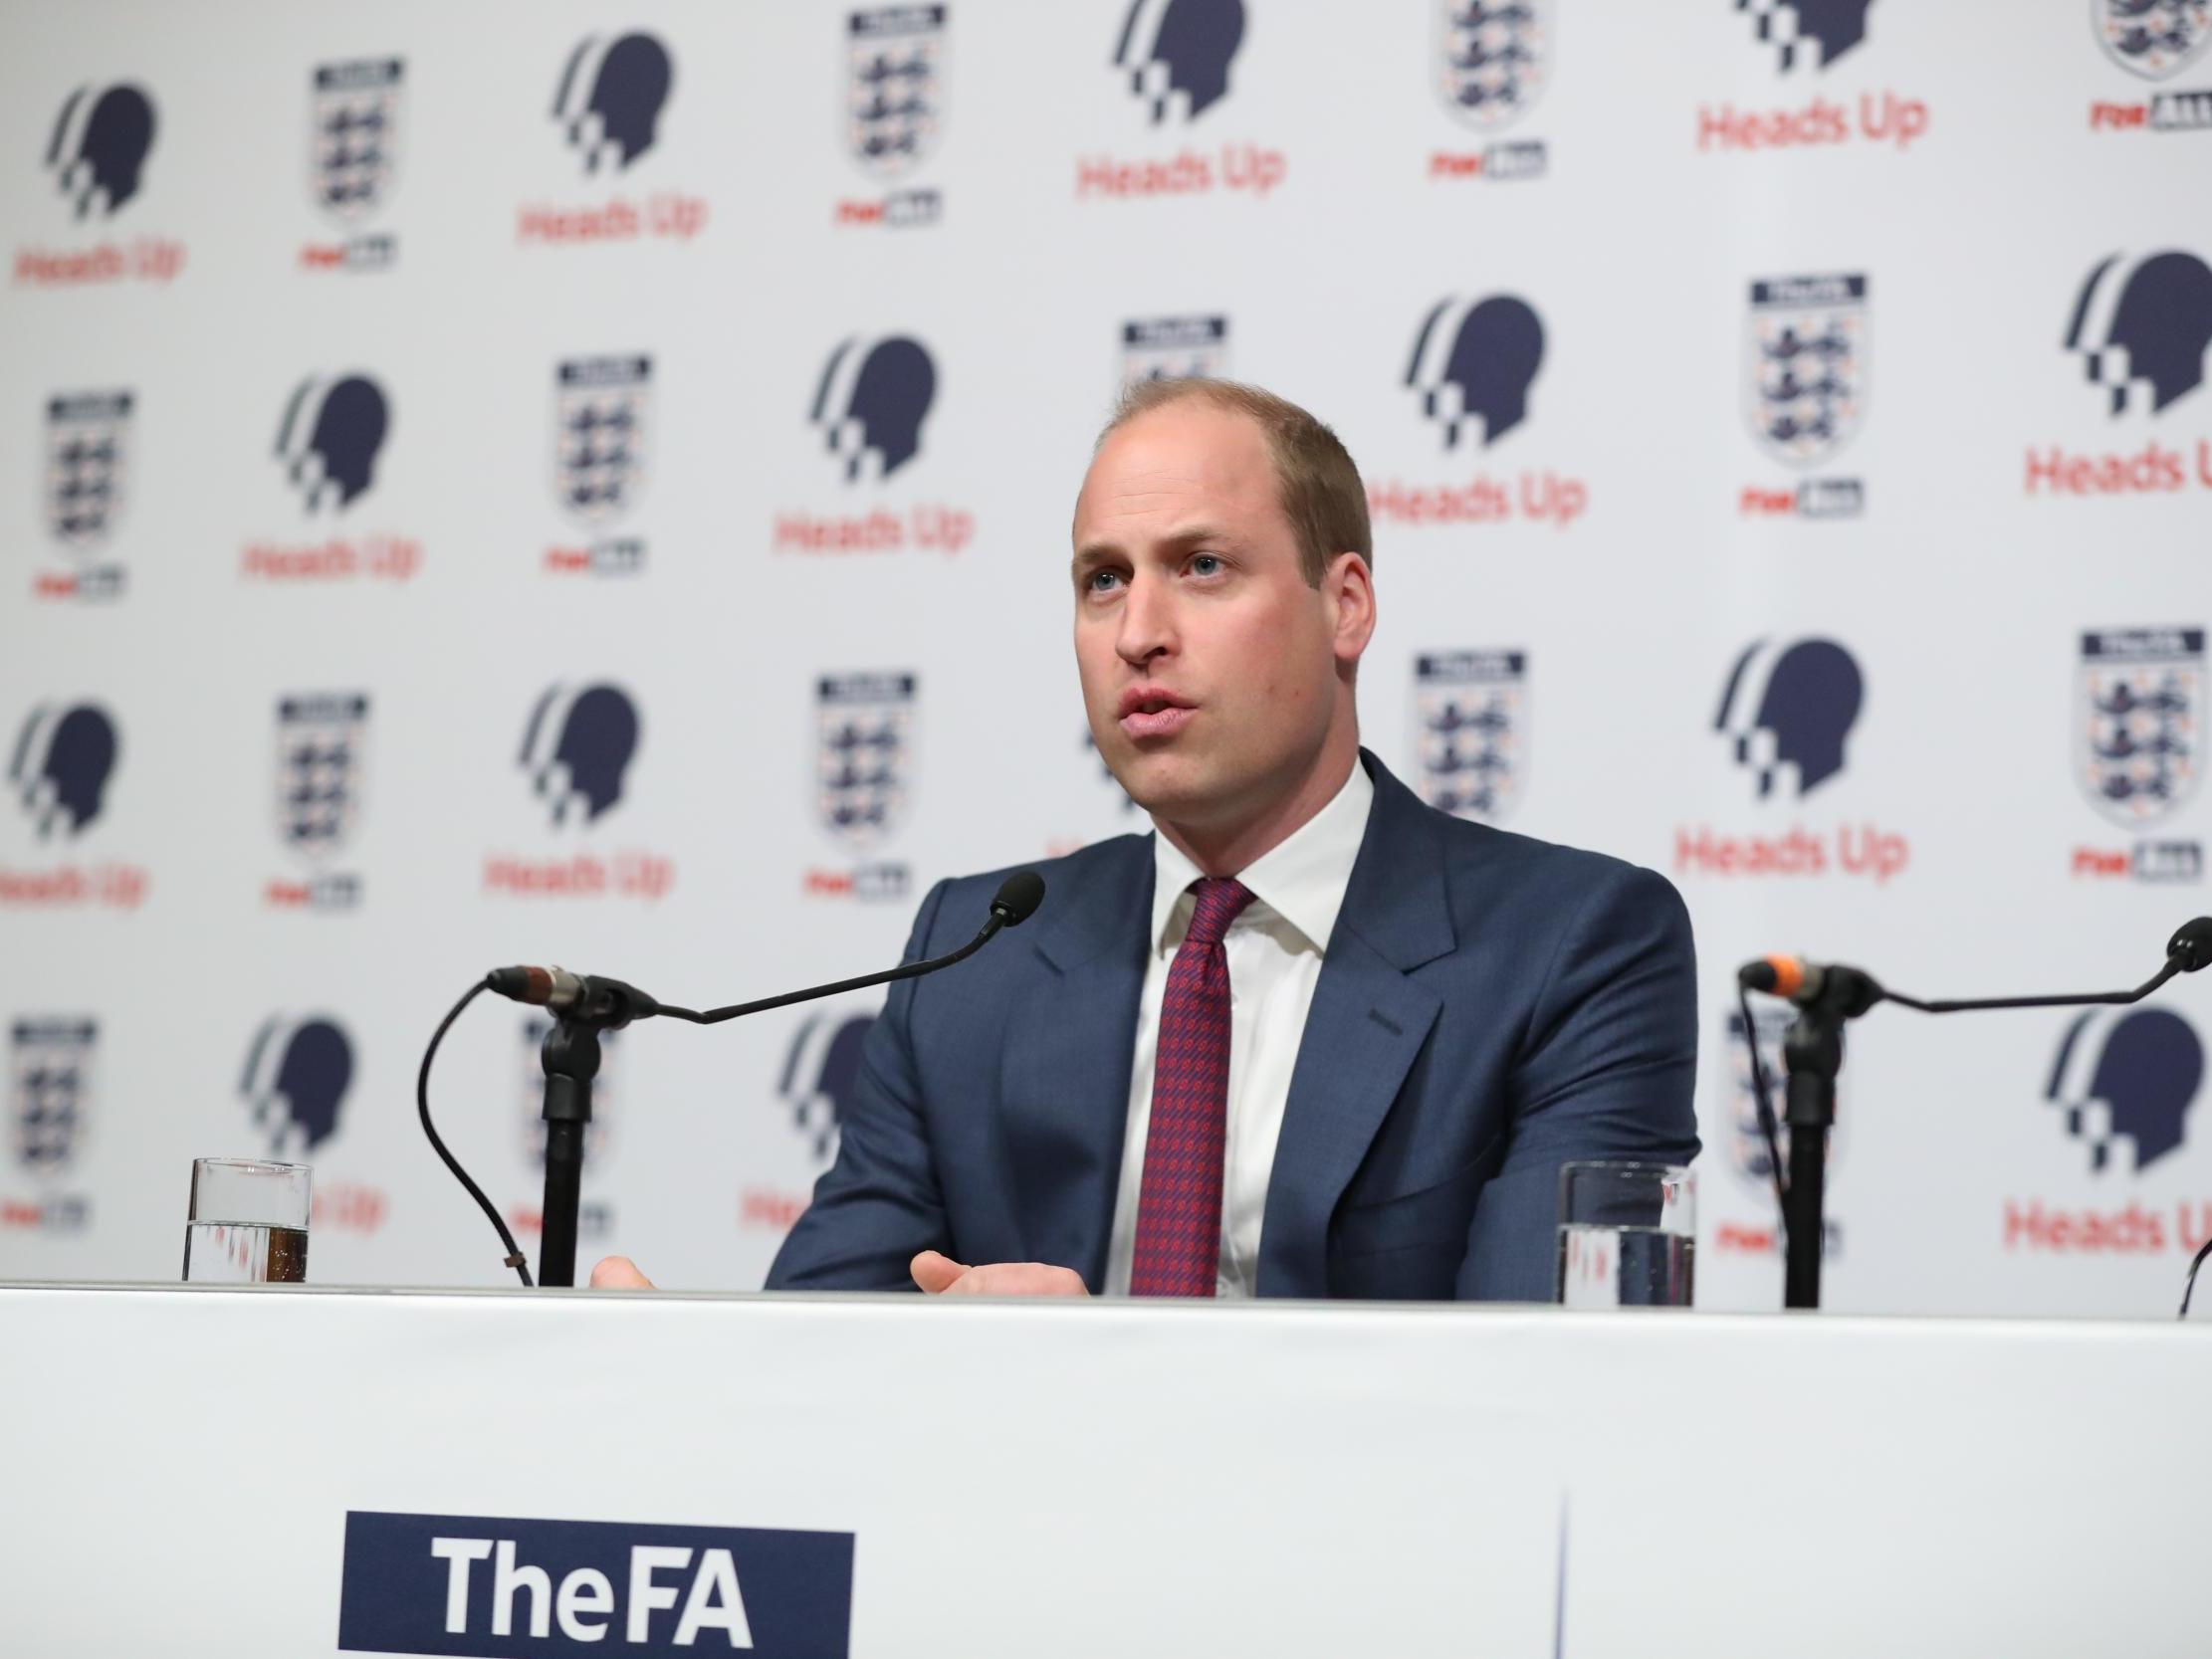 Sport’s governing bodies are now doing more to improve wellbeing. Earlier this year, Prince William launched a new mental health campaign alongside the FA called ‘Heads Up’